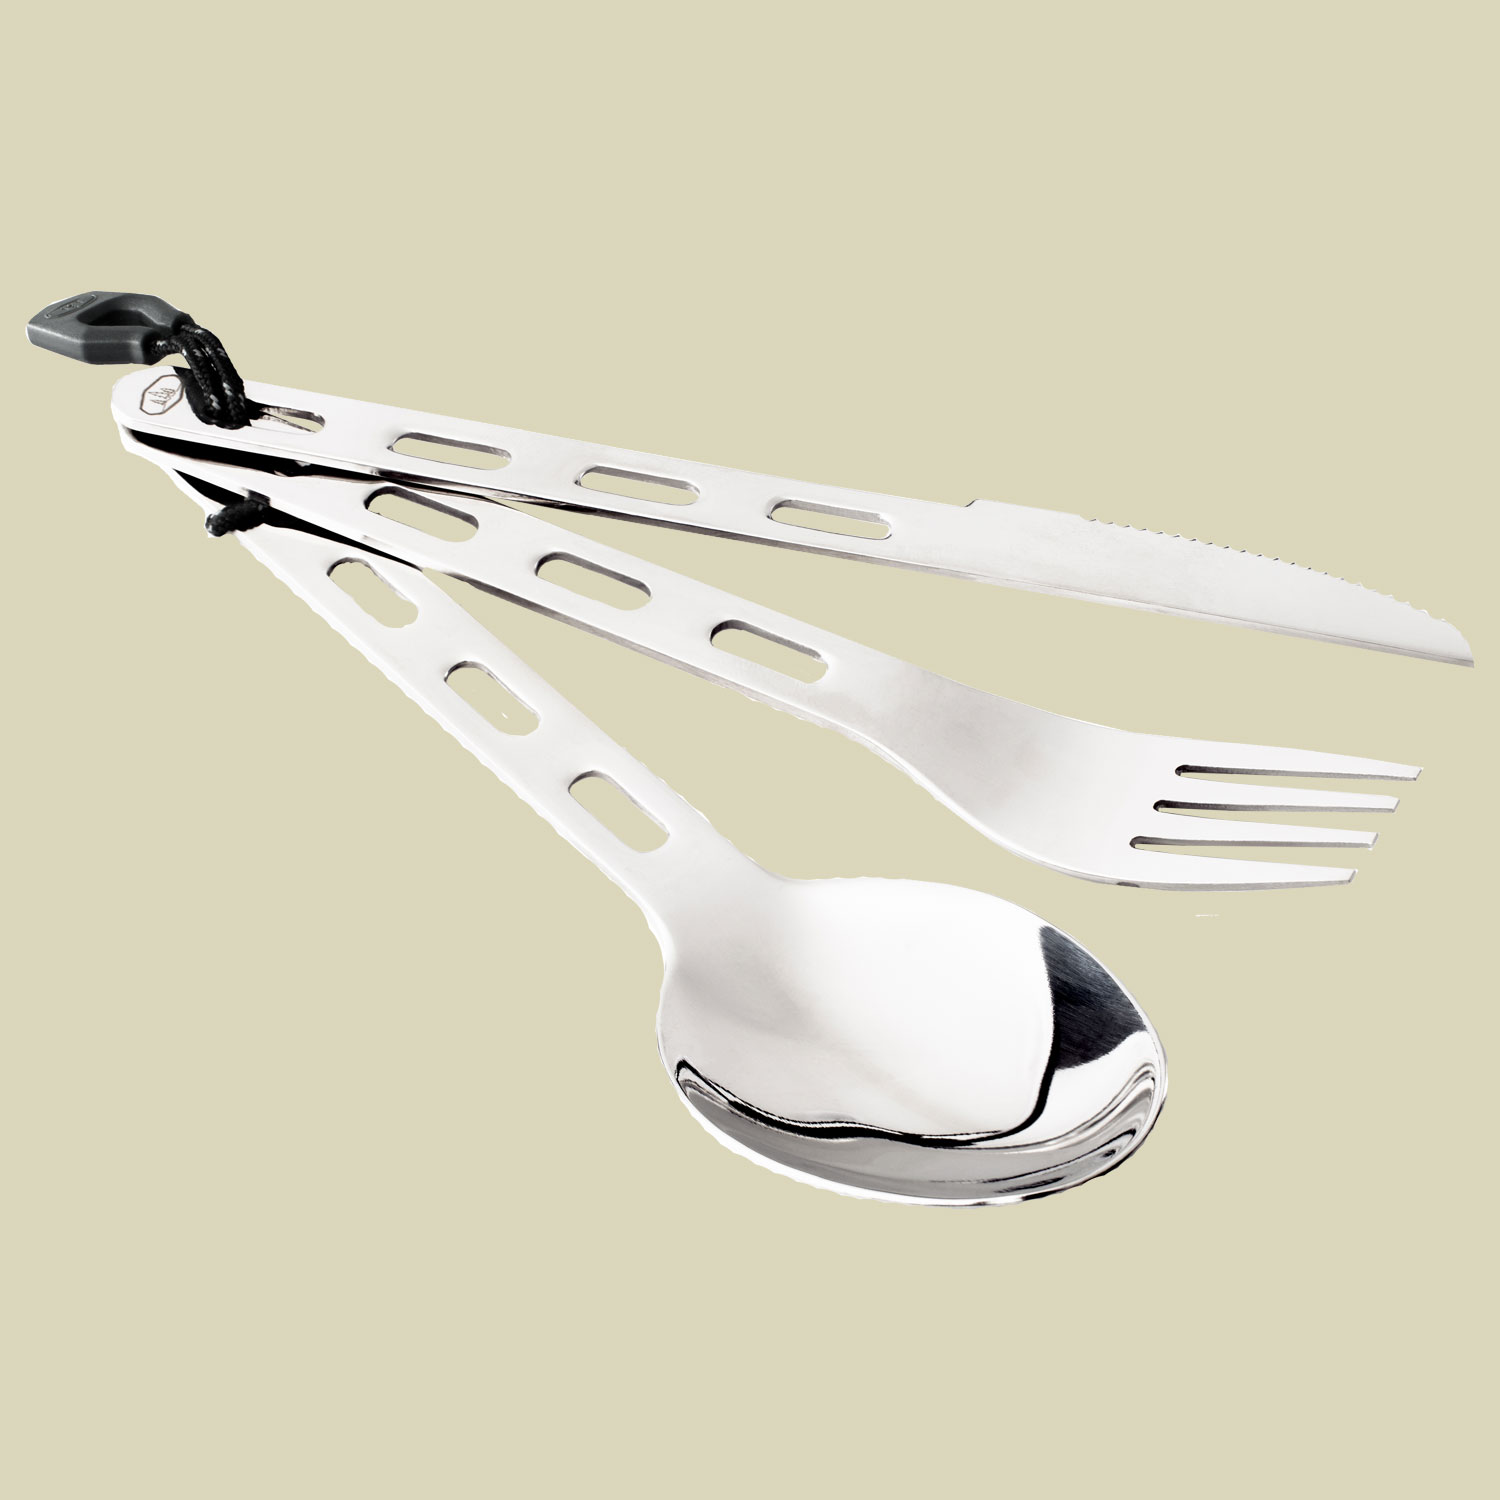 Glacier Stainless 3 PC Ring Cutlery